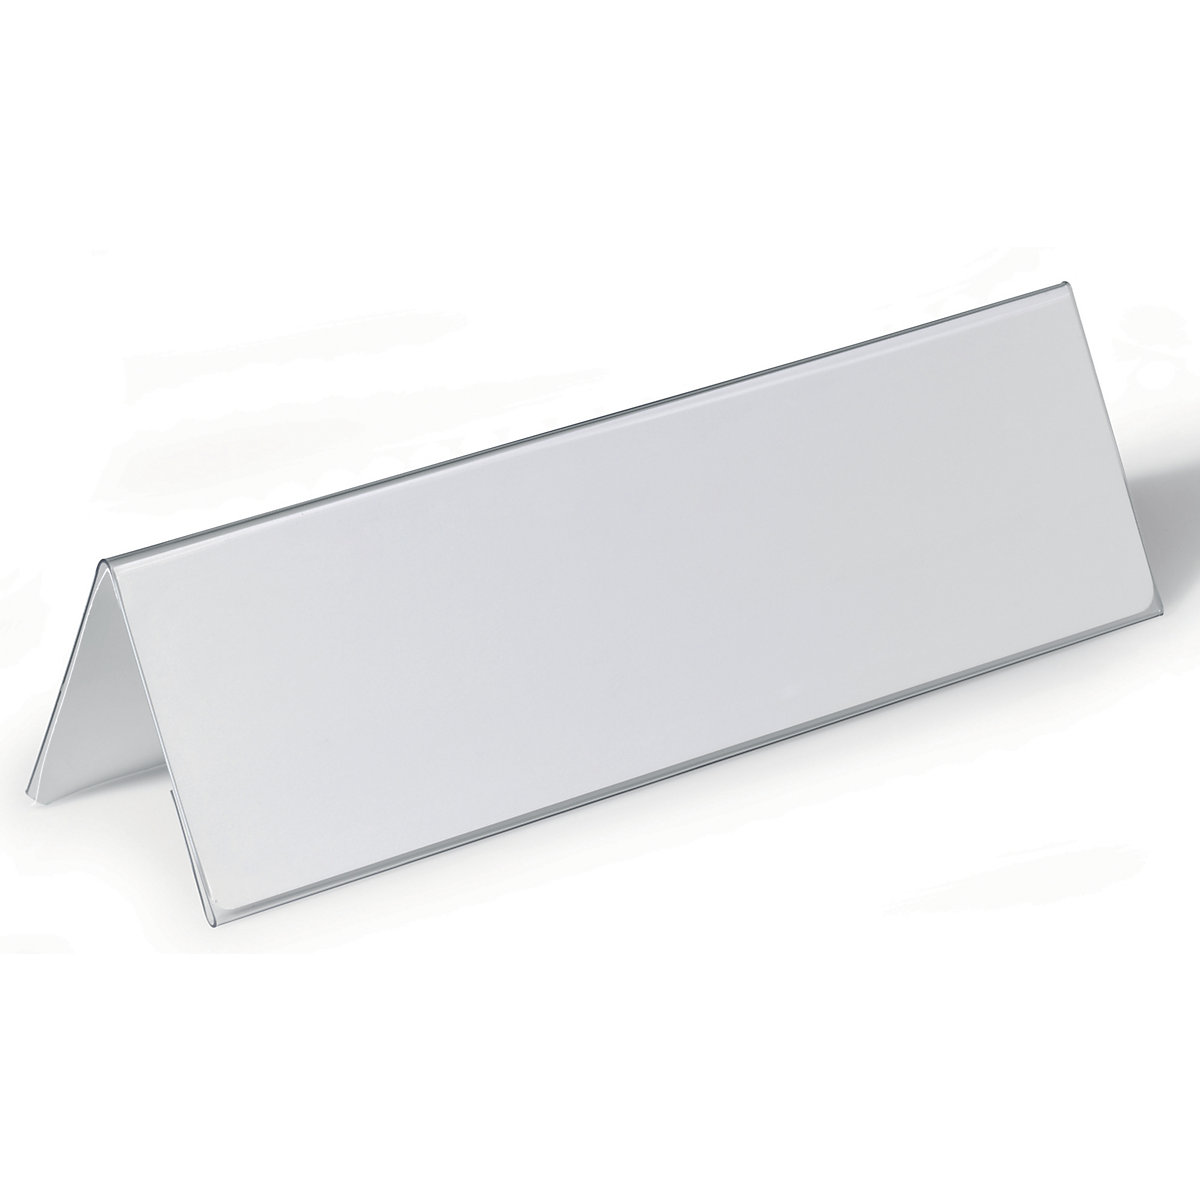 Table place name holder made of hard foil – DURABLE